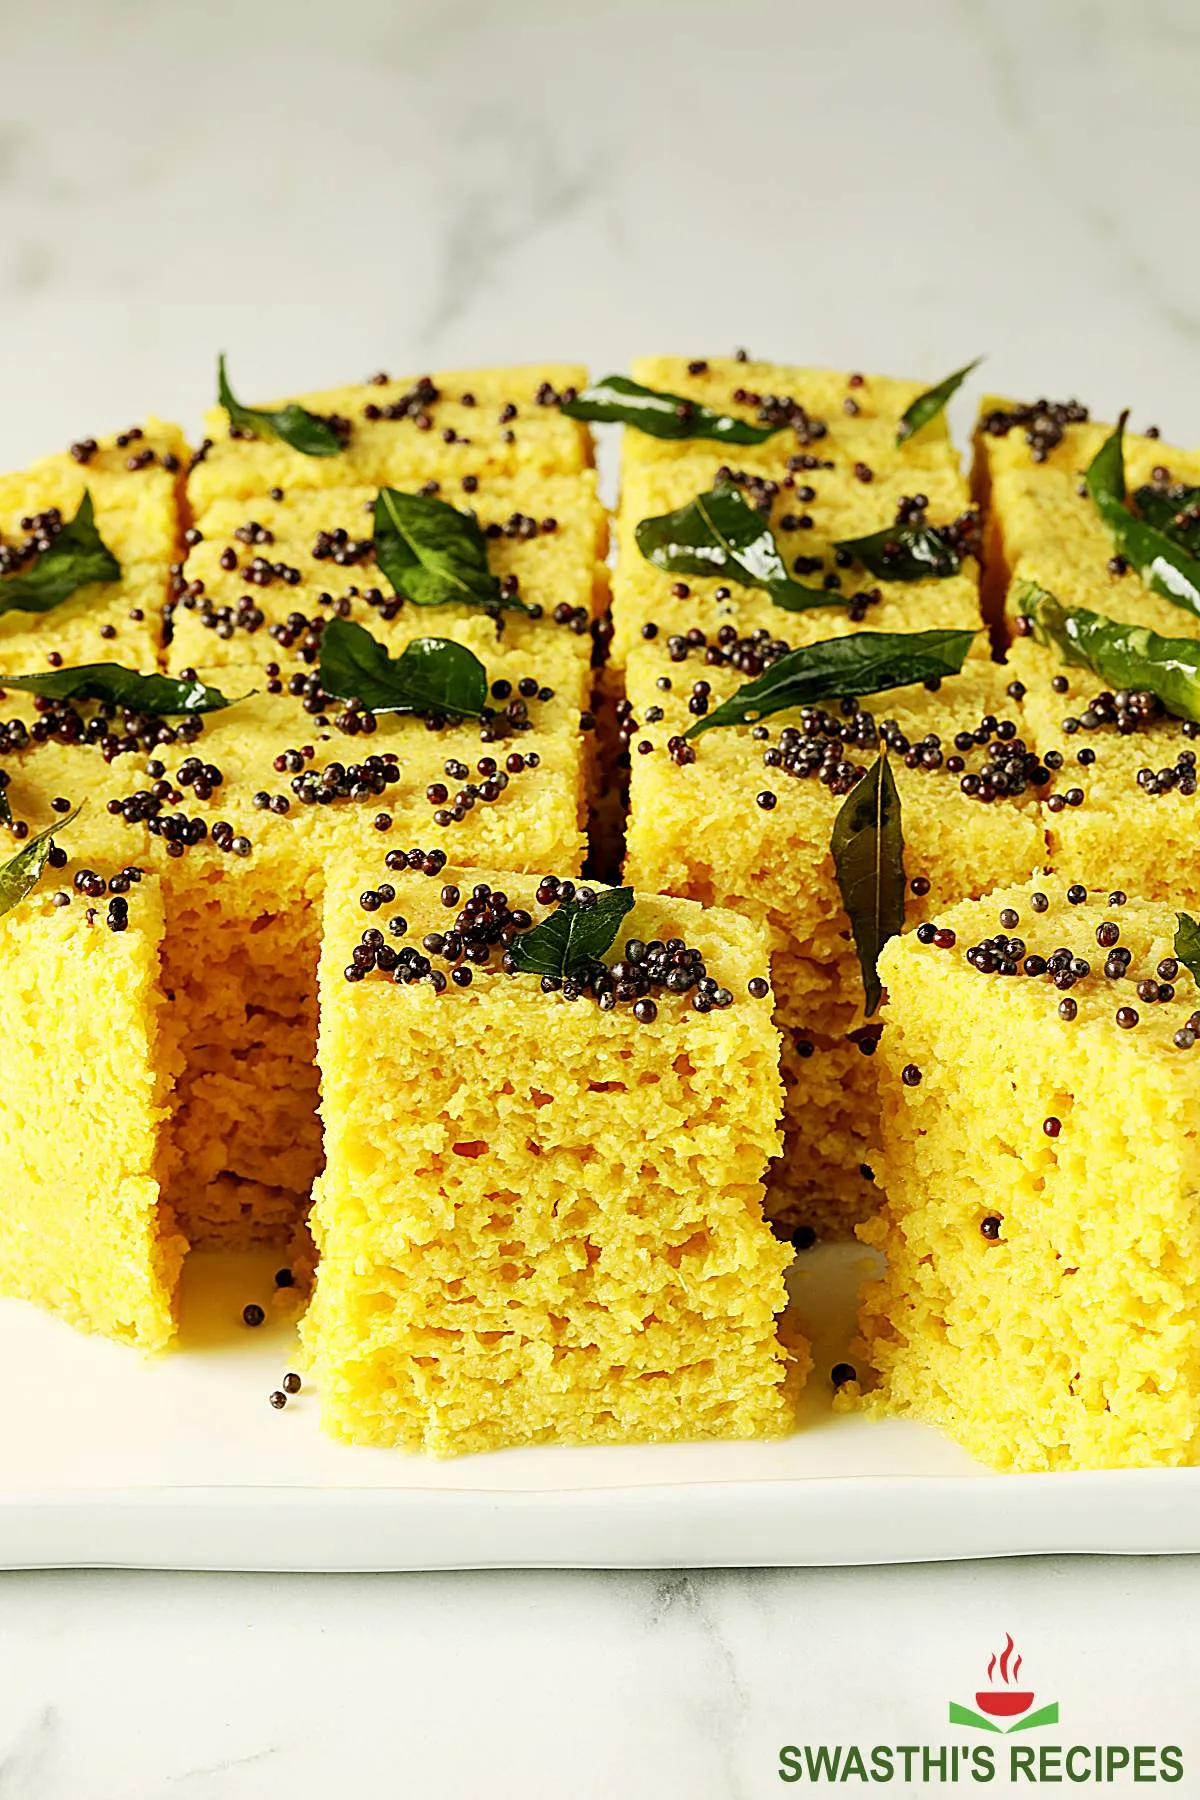 Dhokla also known as Khamn dhokla served in a white tray